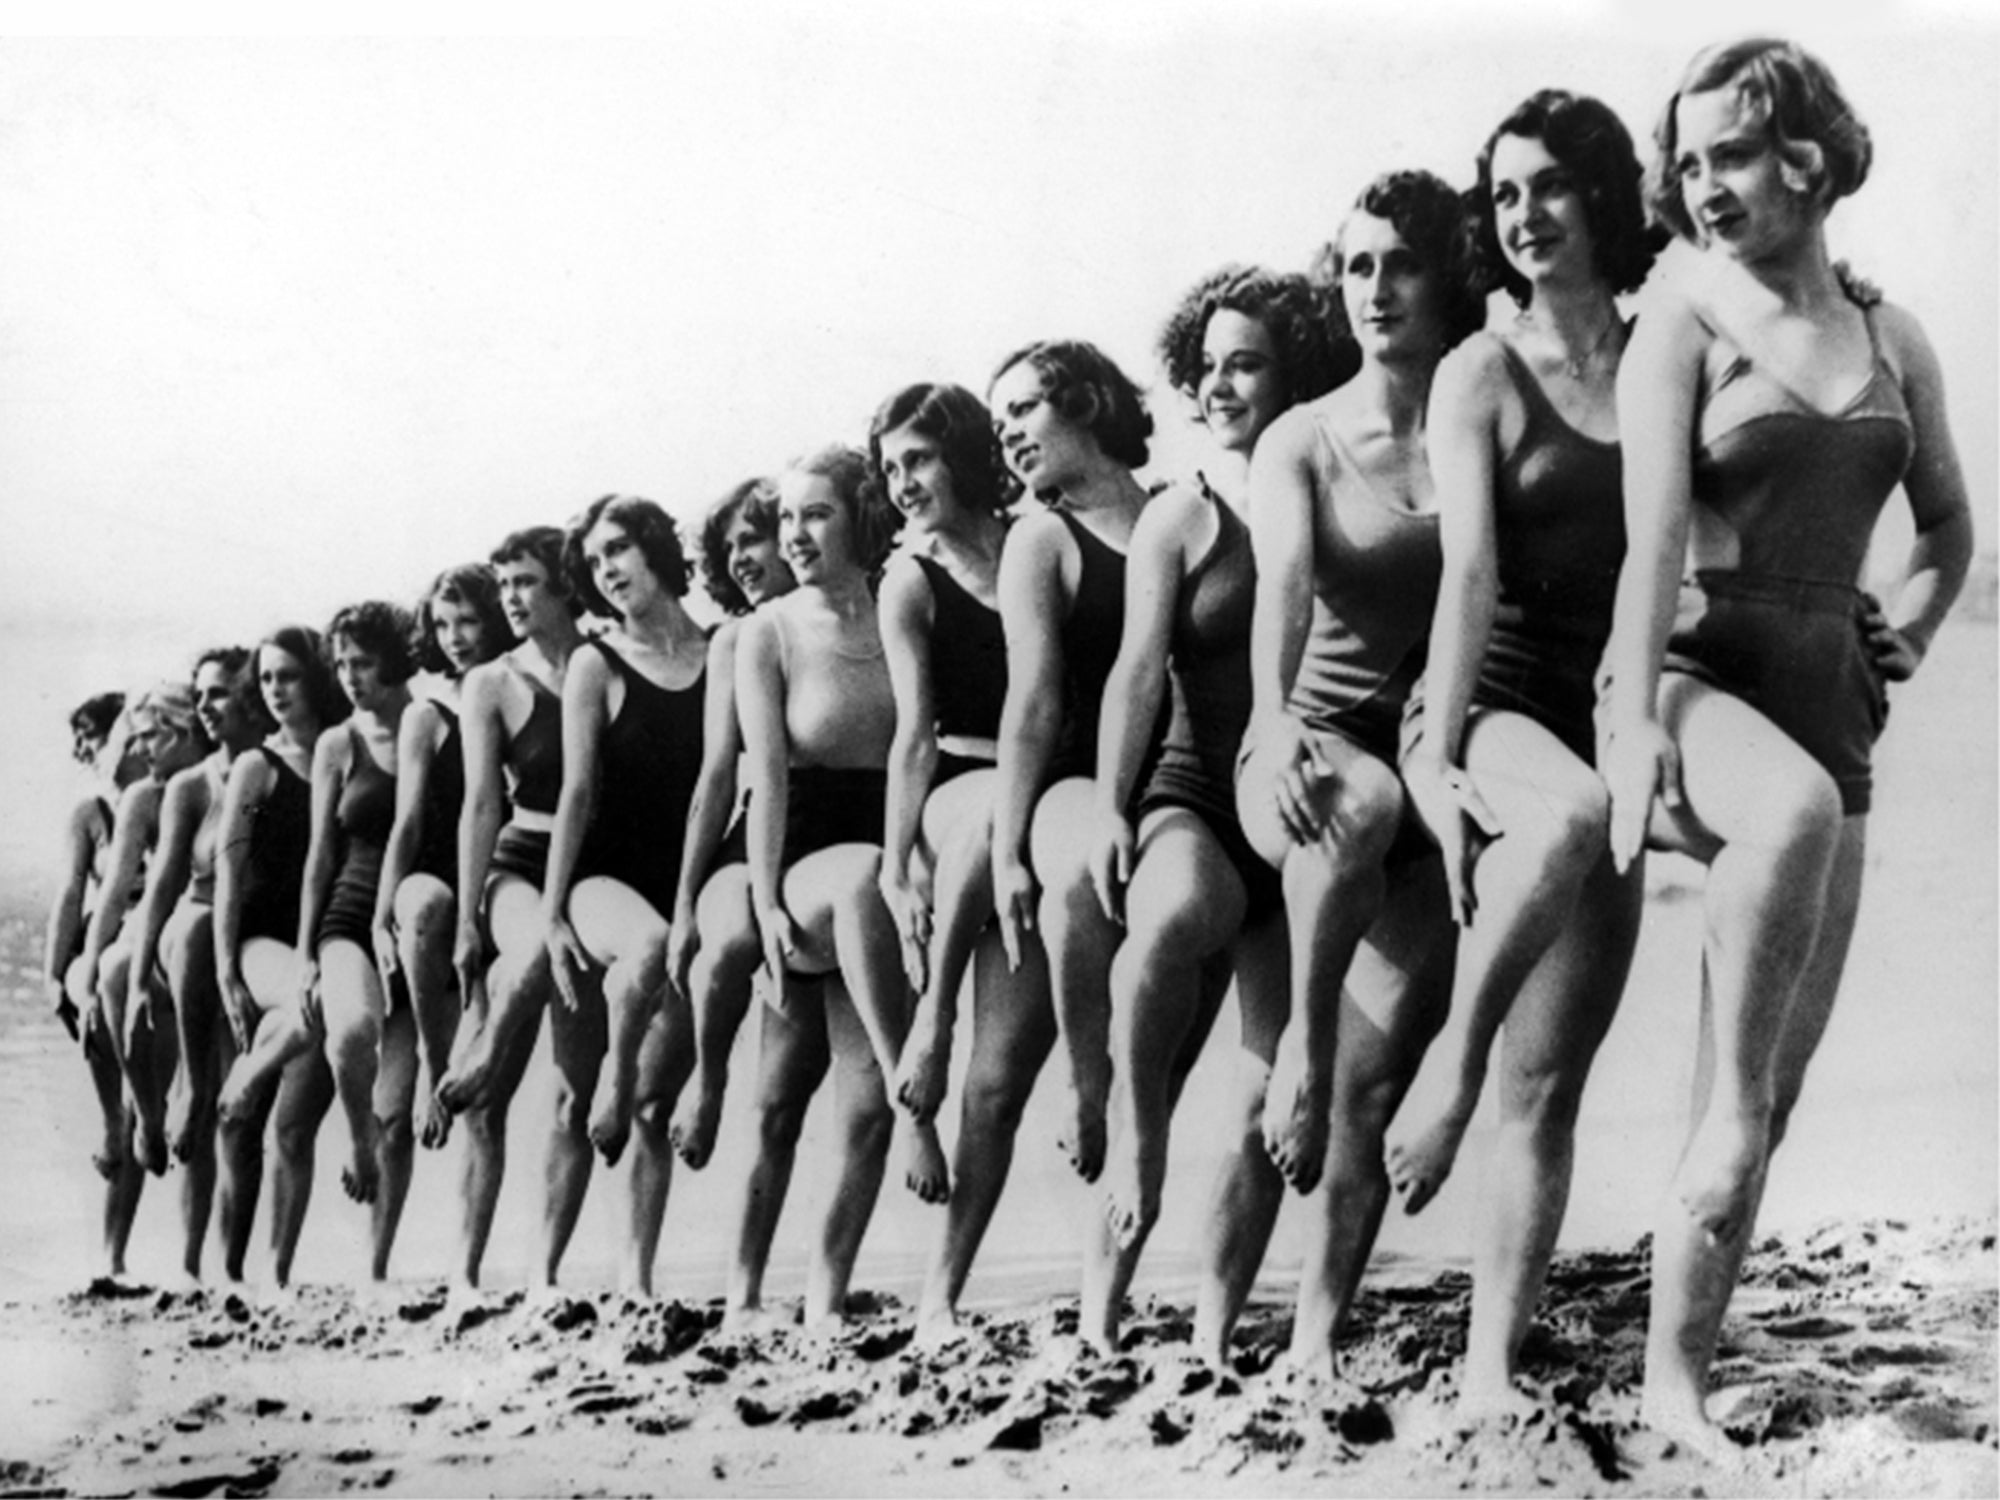 A brief history of the swimming suit from the beginning to the